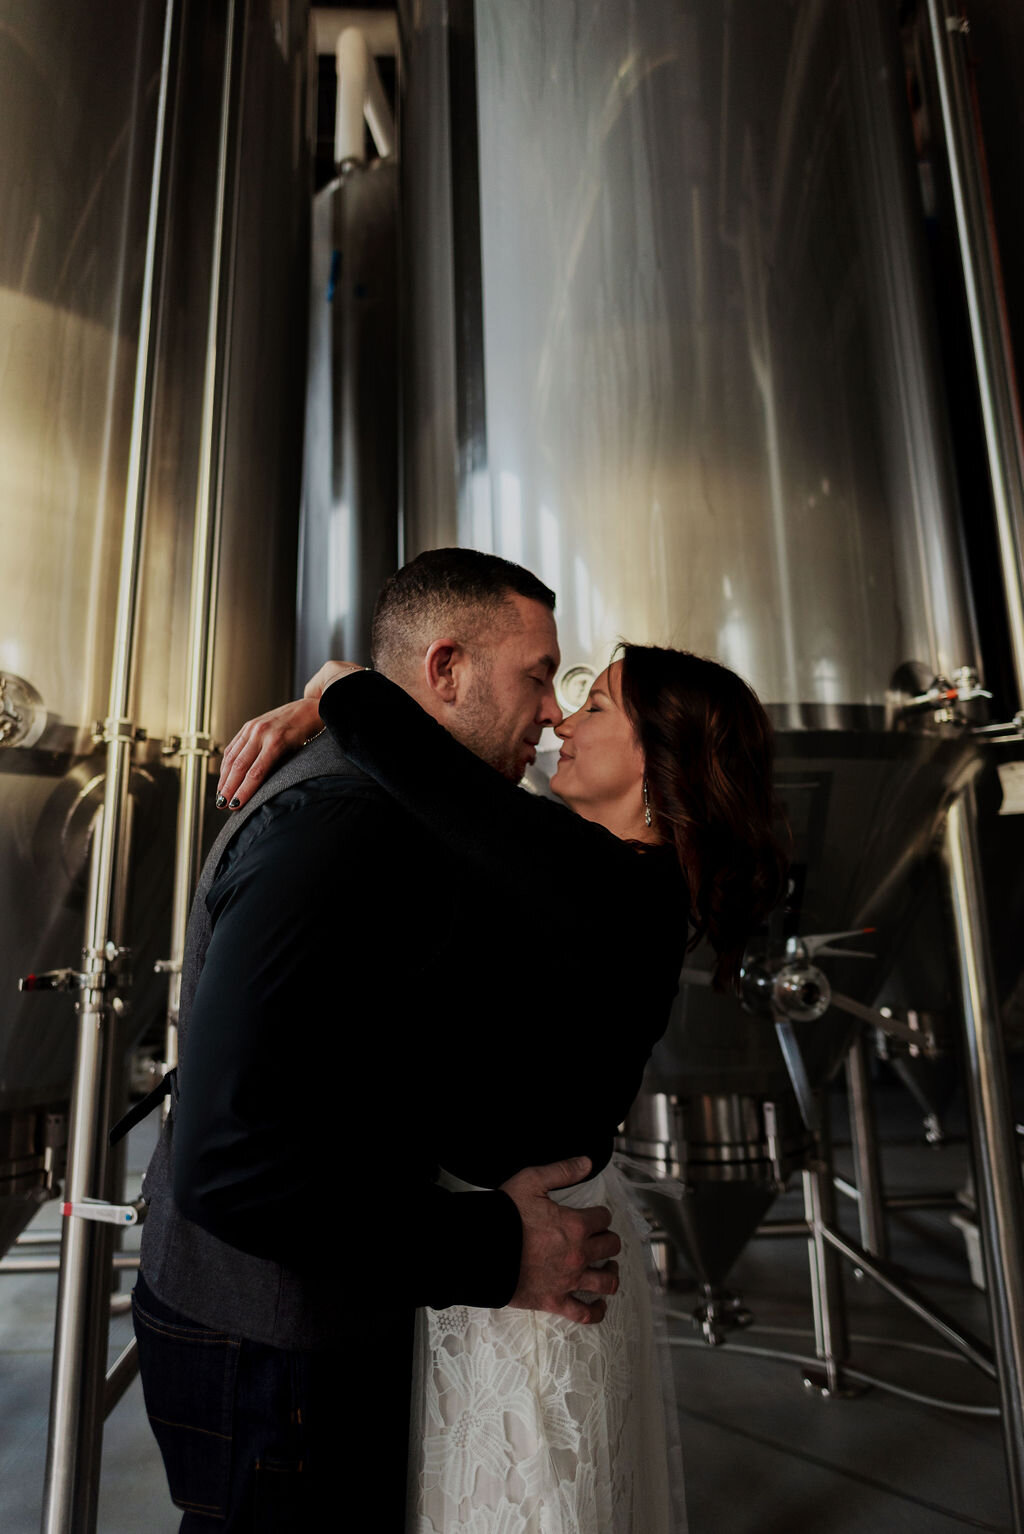 Super Fun, Nontraditional Wedding at Alter Brewing captured by Mackenzie Maeder featured on CHI thee WED